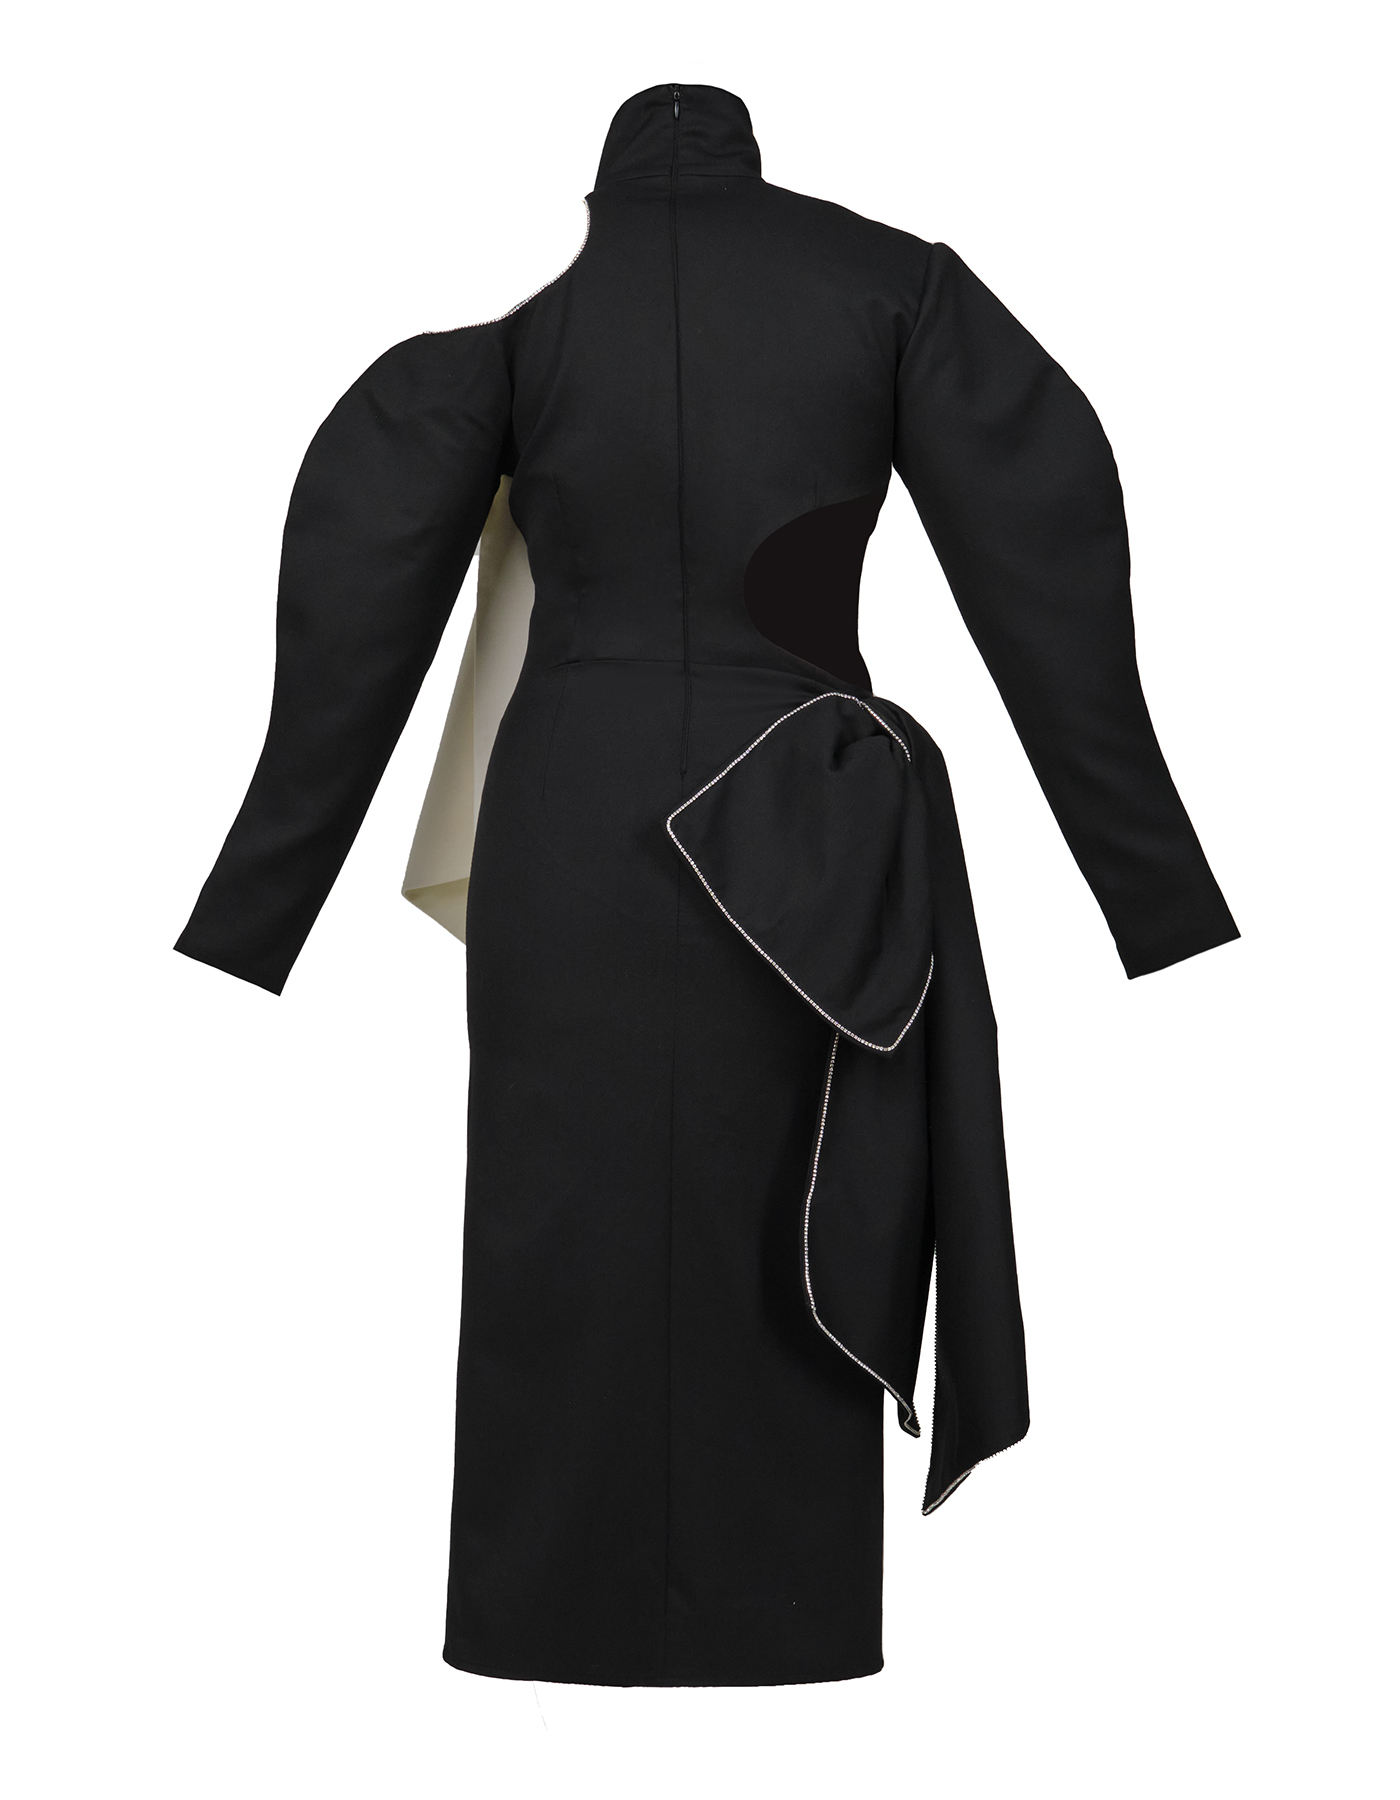 SS22. Black turtleneck dress with bows